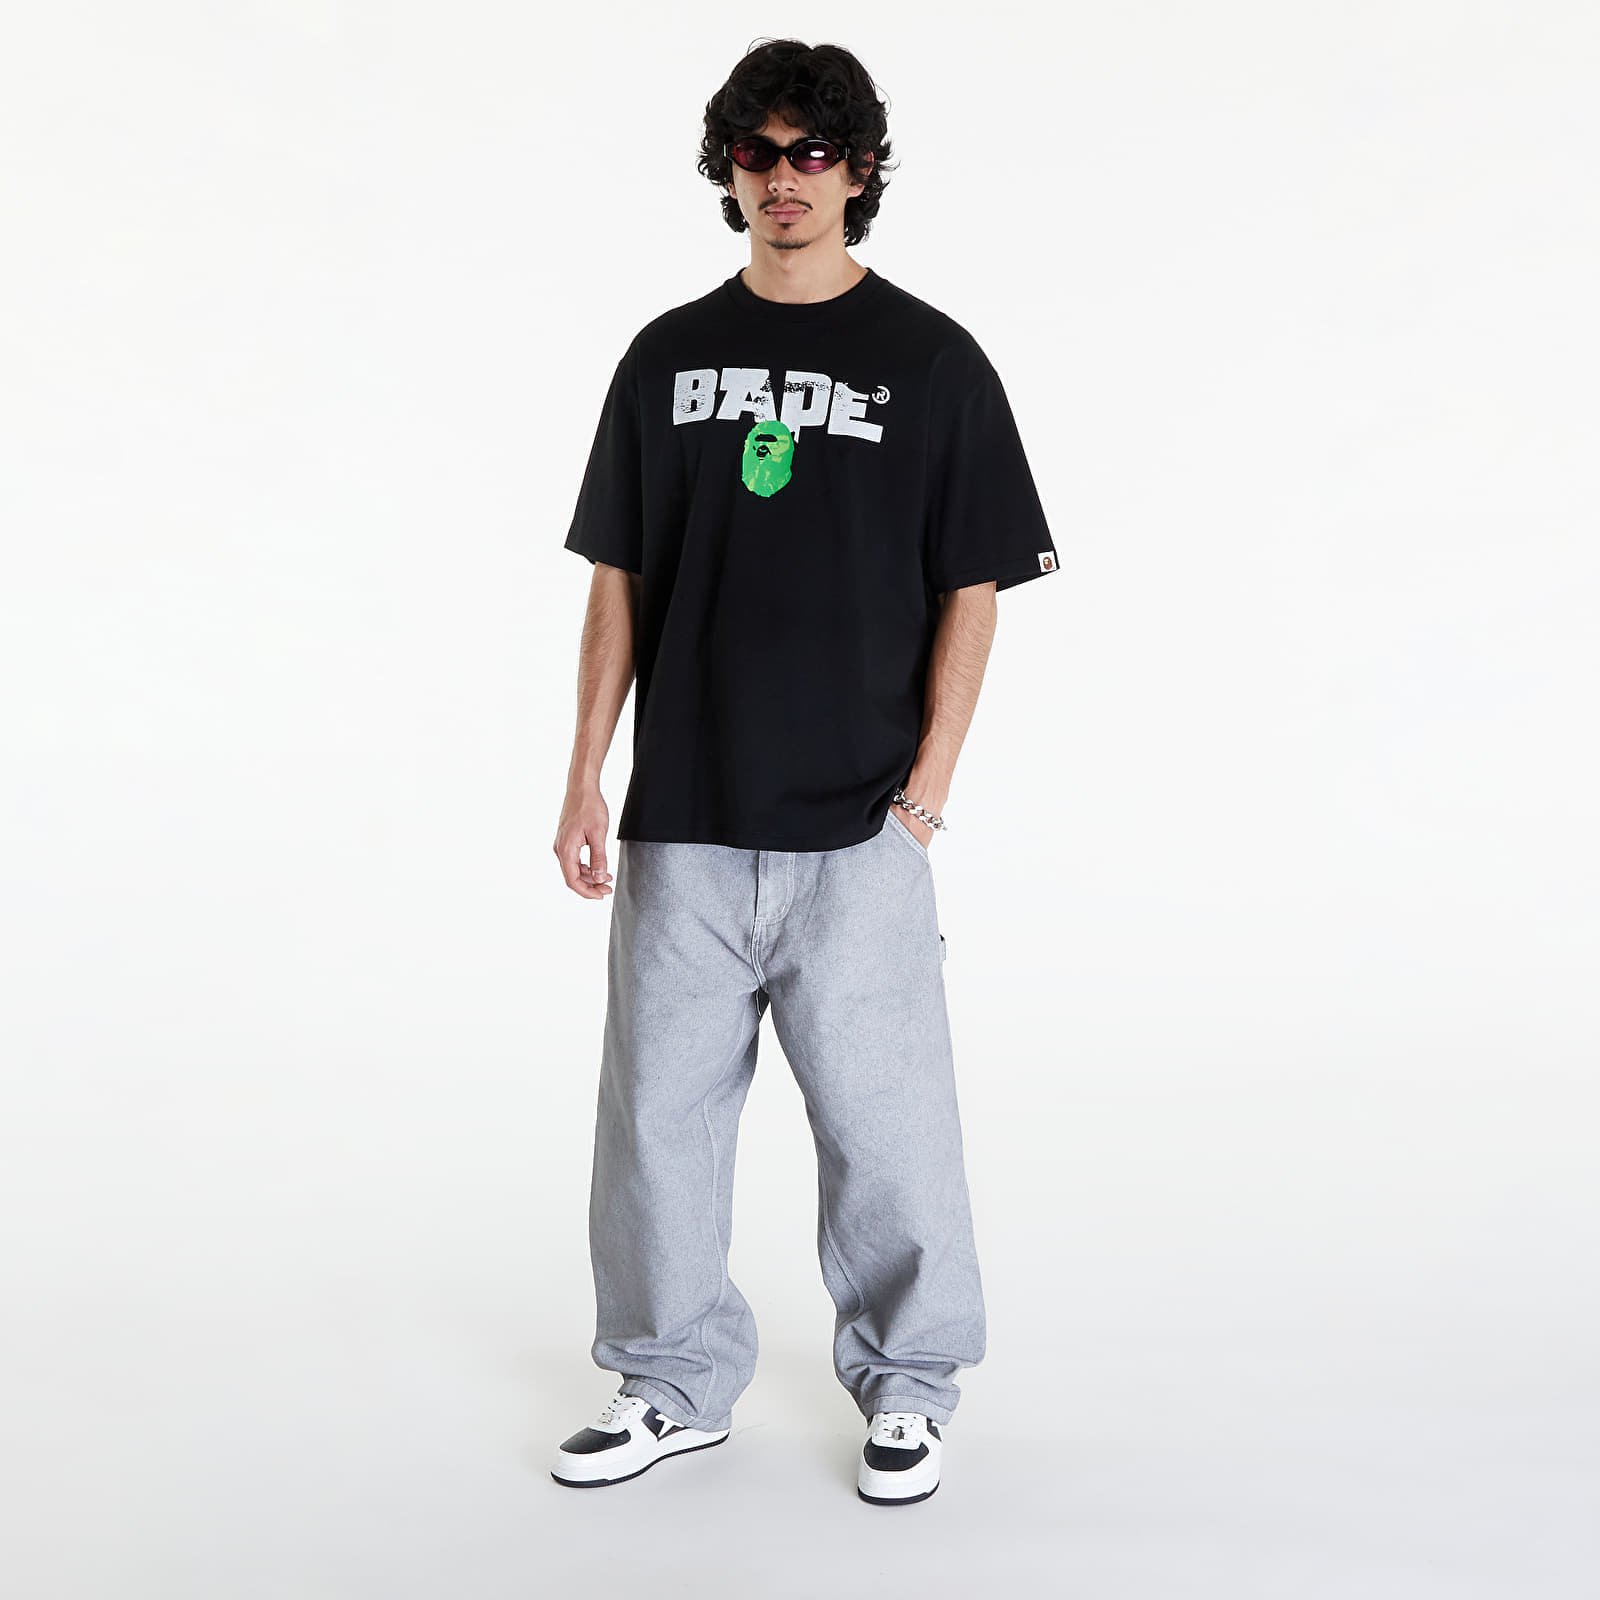 A BATHING APE Bape Army Relaxed Fit Tee Black